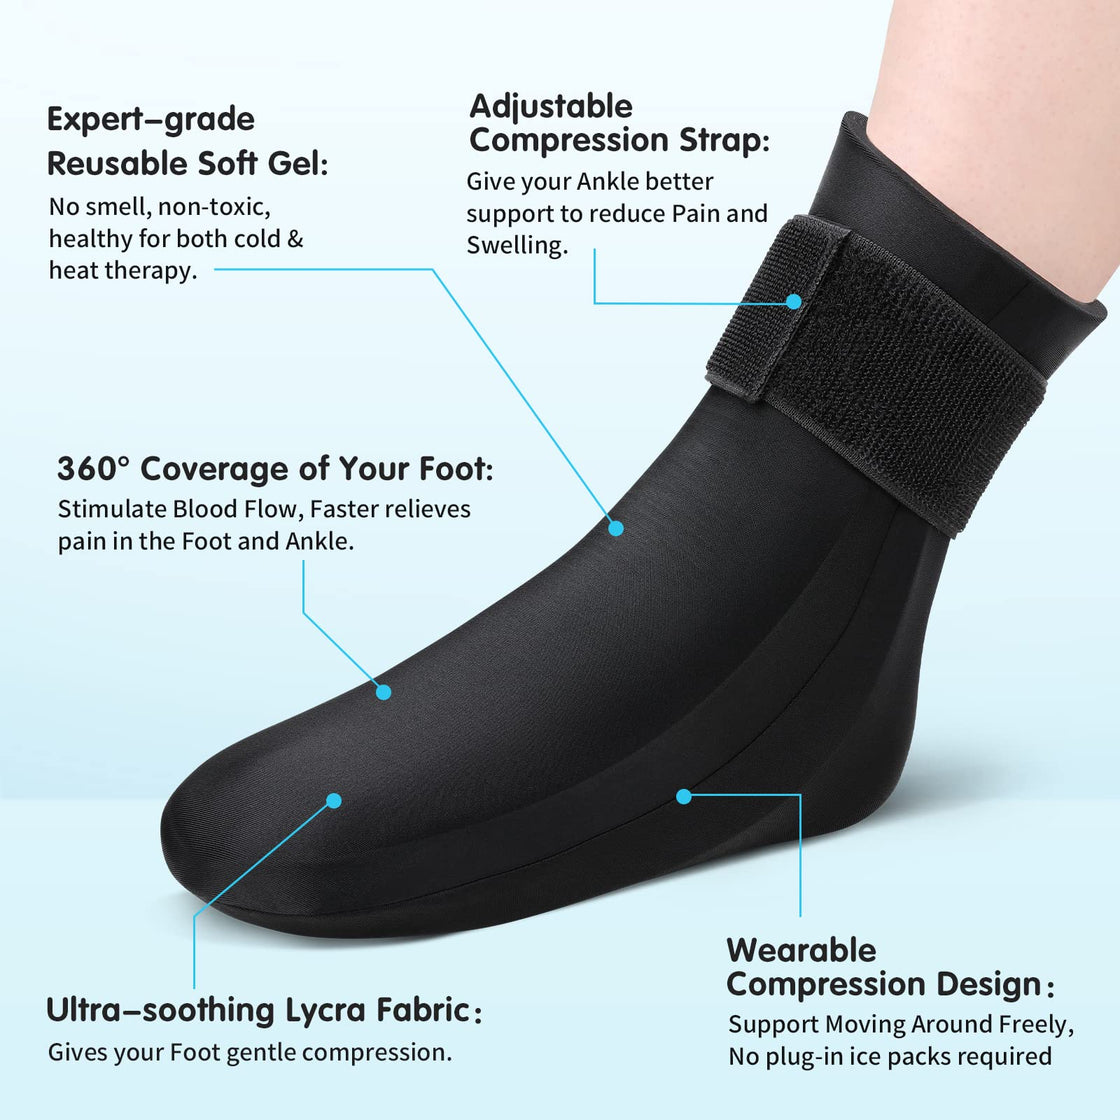 Tolaccea Reusable Gel Cold Therapy Sock for Hot & Cold Therapy